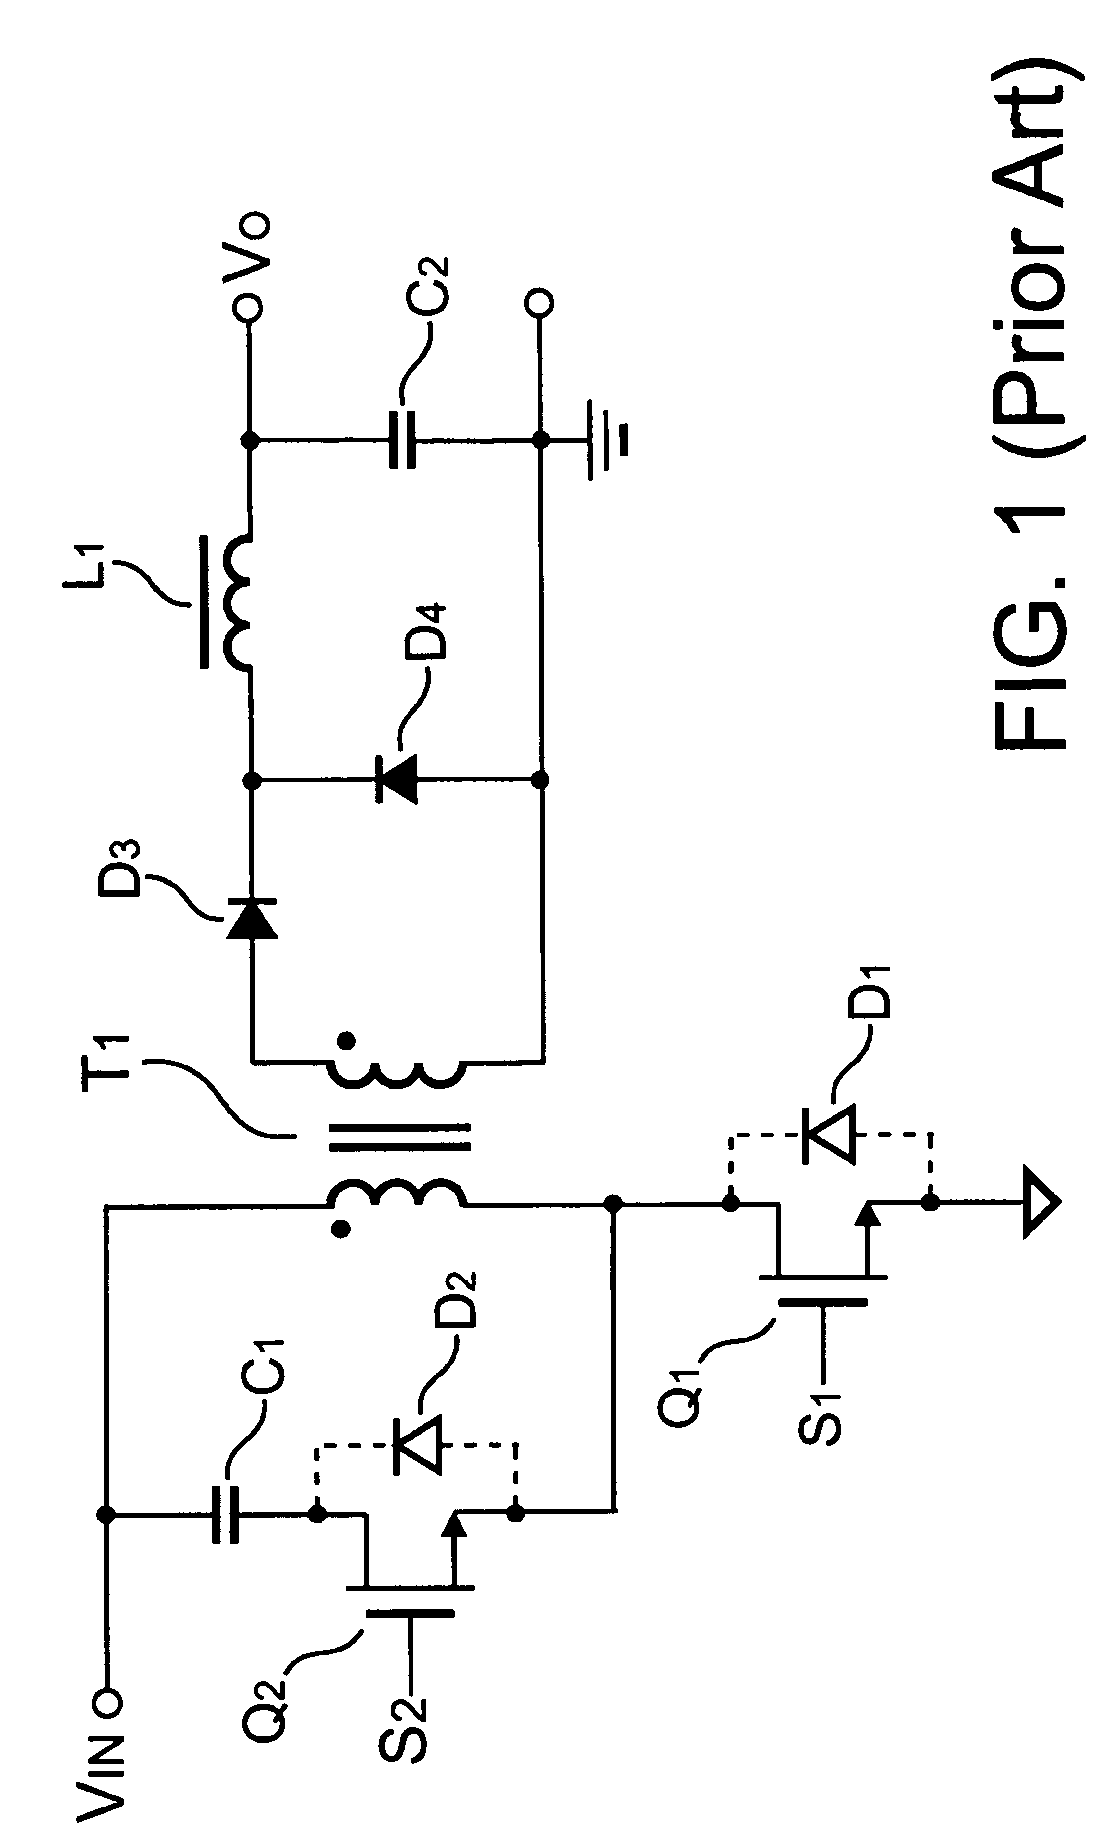 Soft-switching power converter having power saving circuit for light load operations